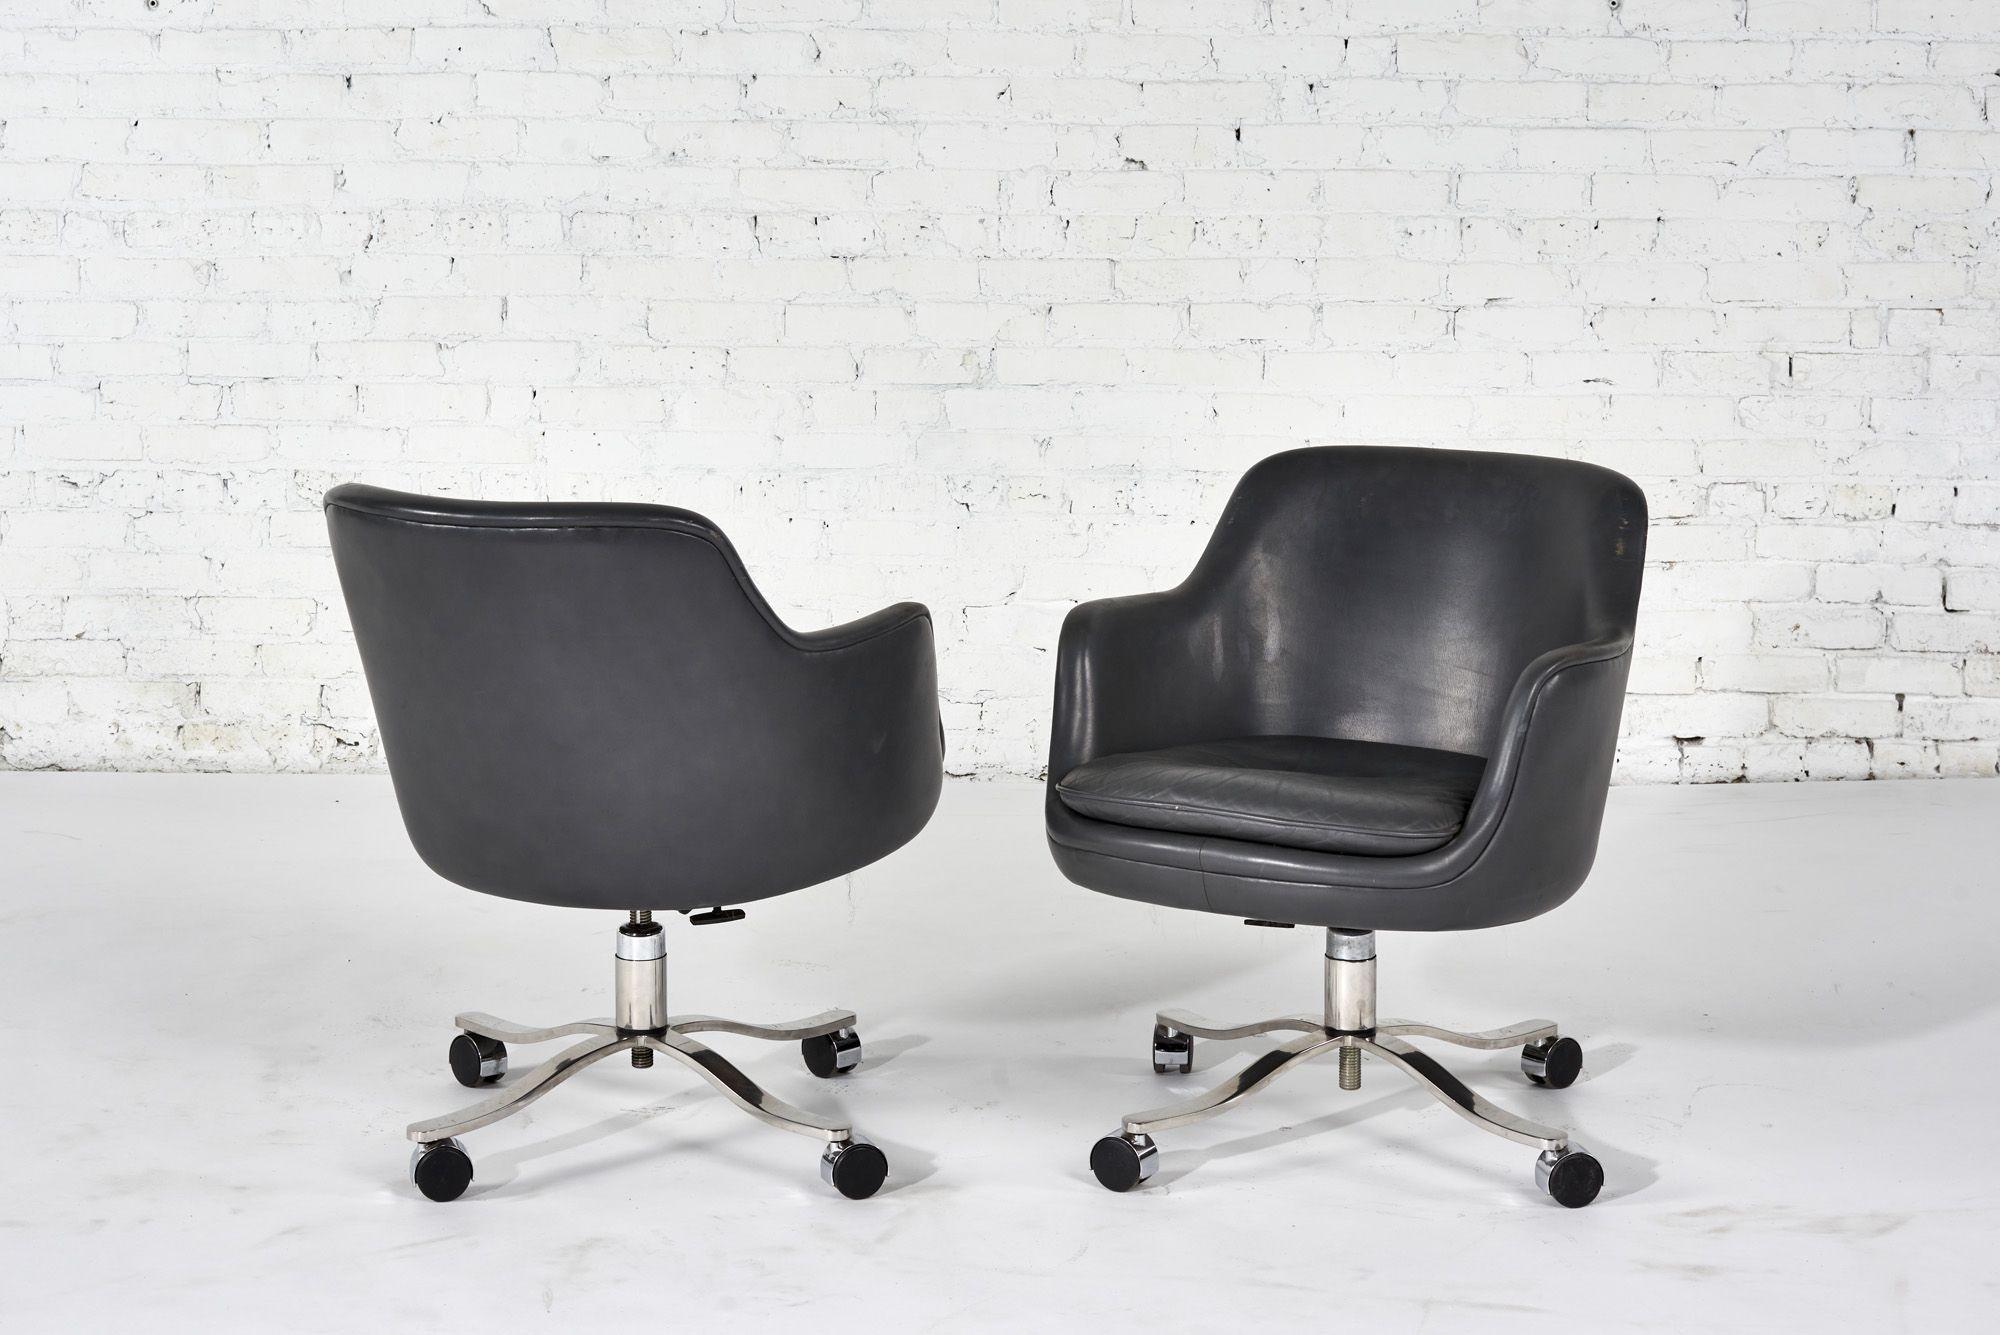 Nicos Zographos Gray Leather Office/Desk Chairs, 1980 For Sale 2